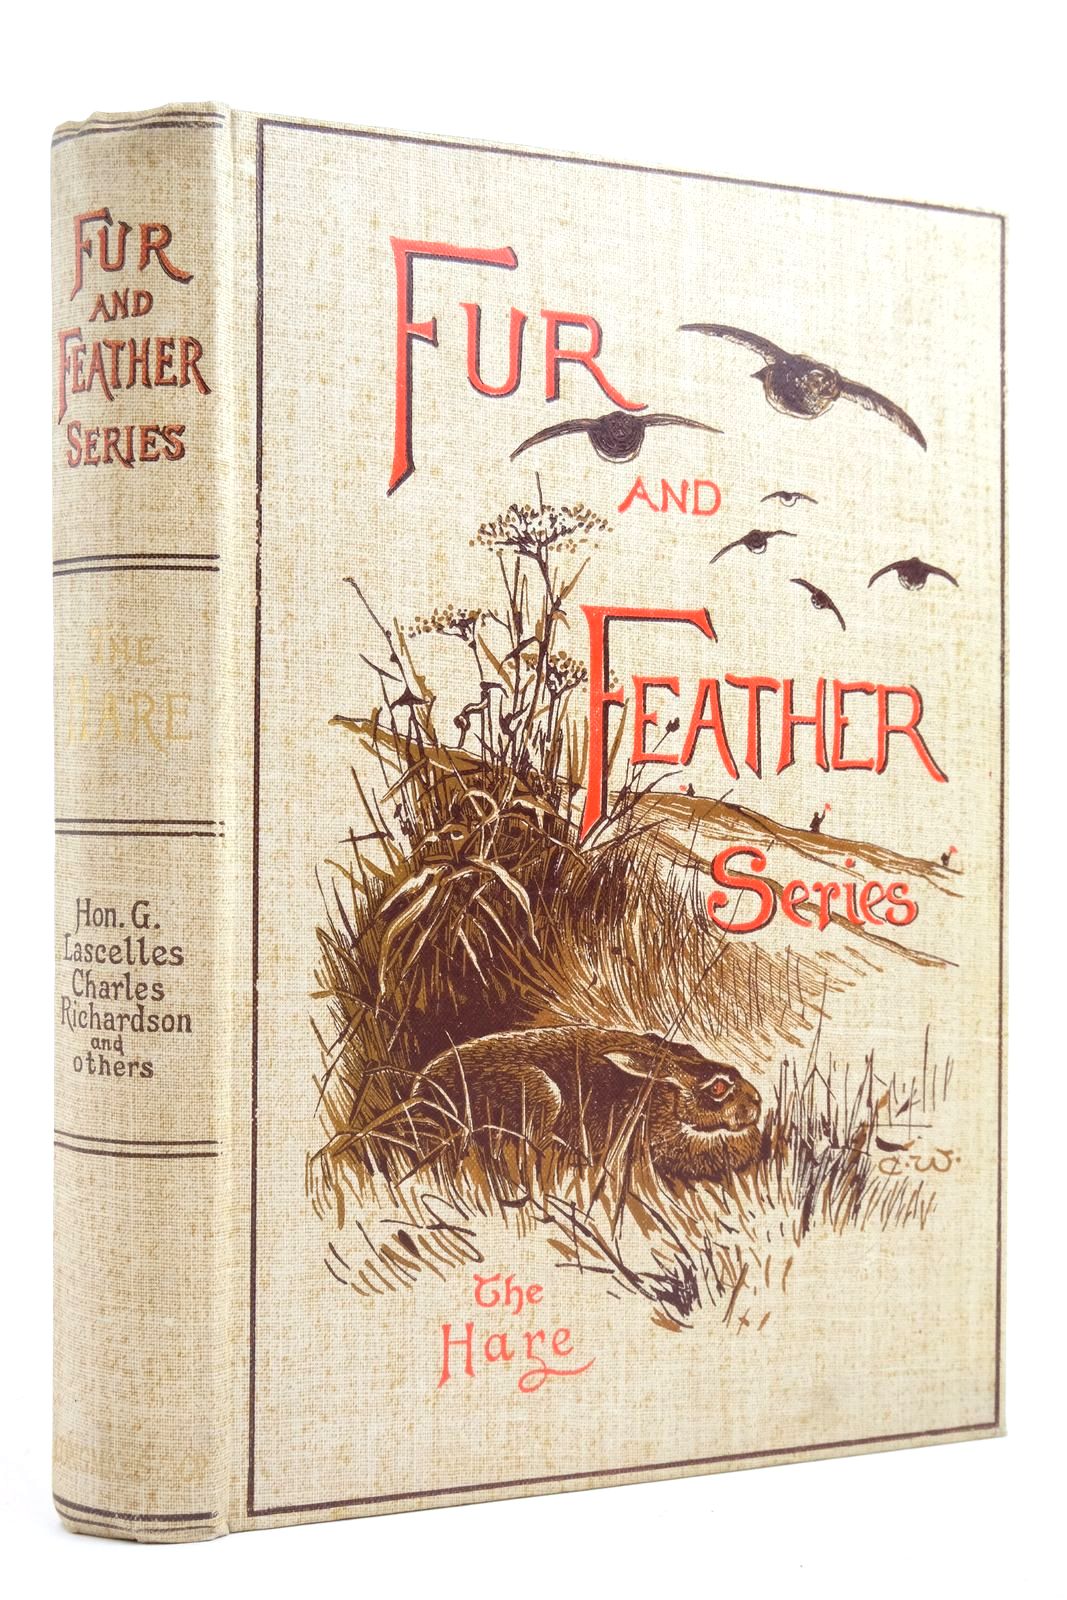 Photo of THE HARE written by MacPherson, H.A. Lascelles, Gerald Richardson, Charles Gibbons, J.S. Longman, G.H. Herbert, Kenney illustrated by Thorburn, Archibald Whymper, Charles et al., published by Longmans, Green &amp; Co. (STOCK CODE: 2136038)  for sale by Stella & Rose's Books